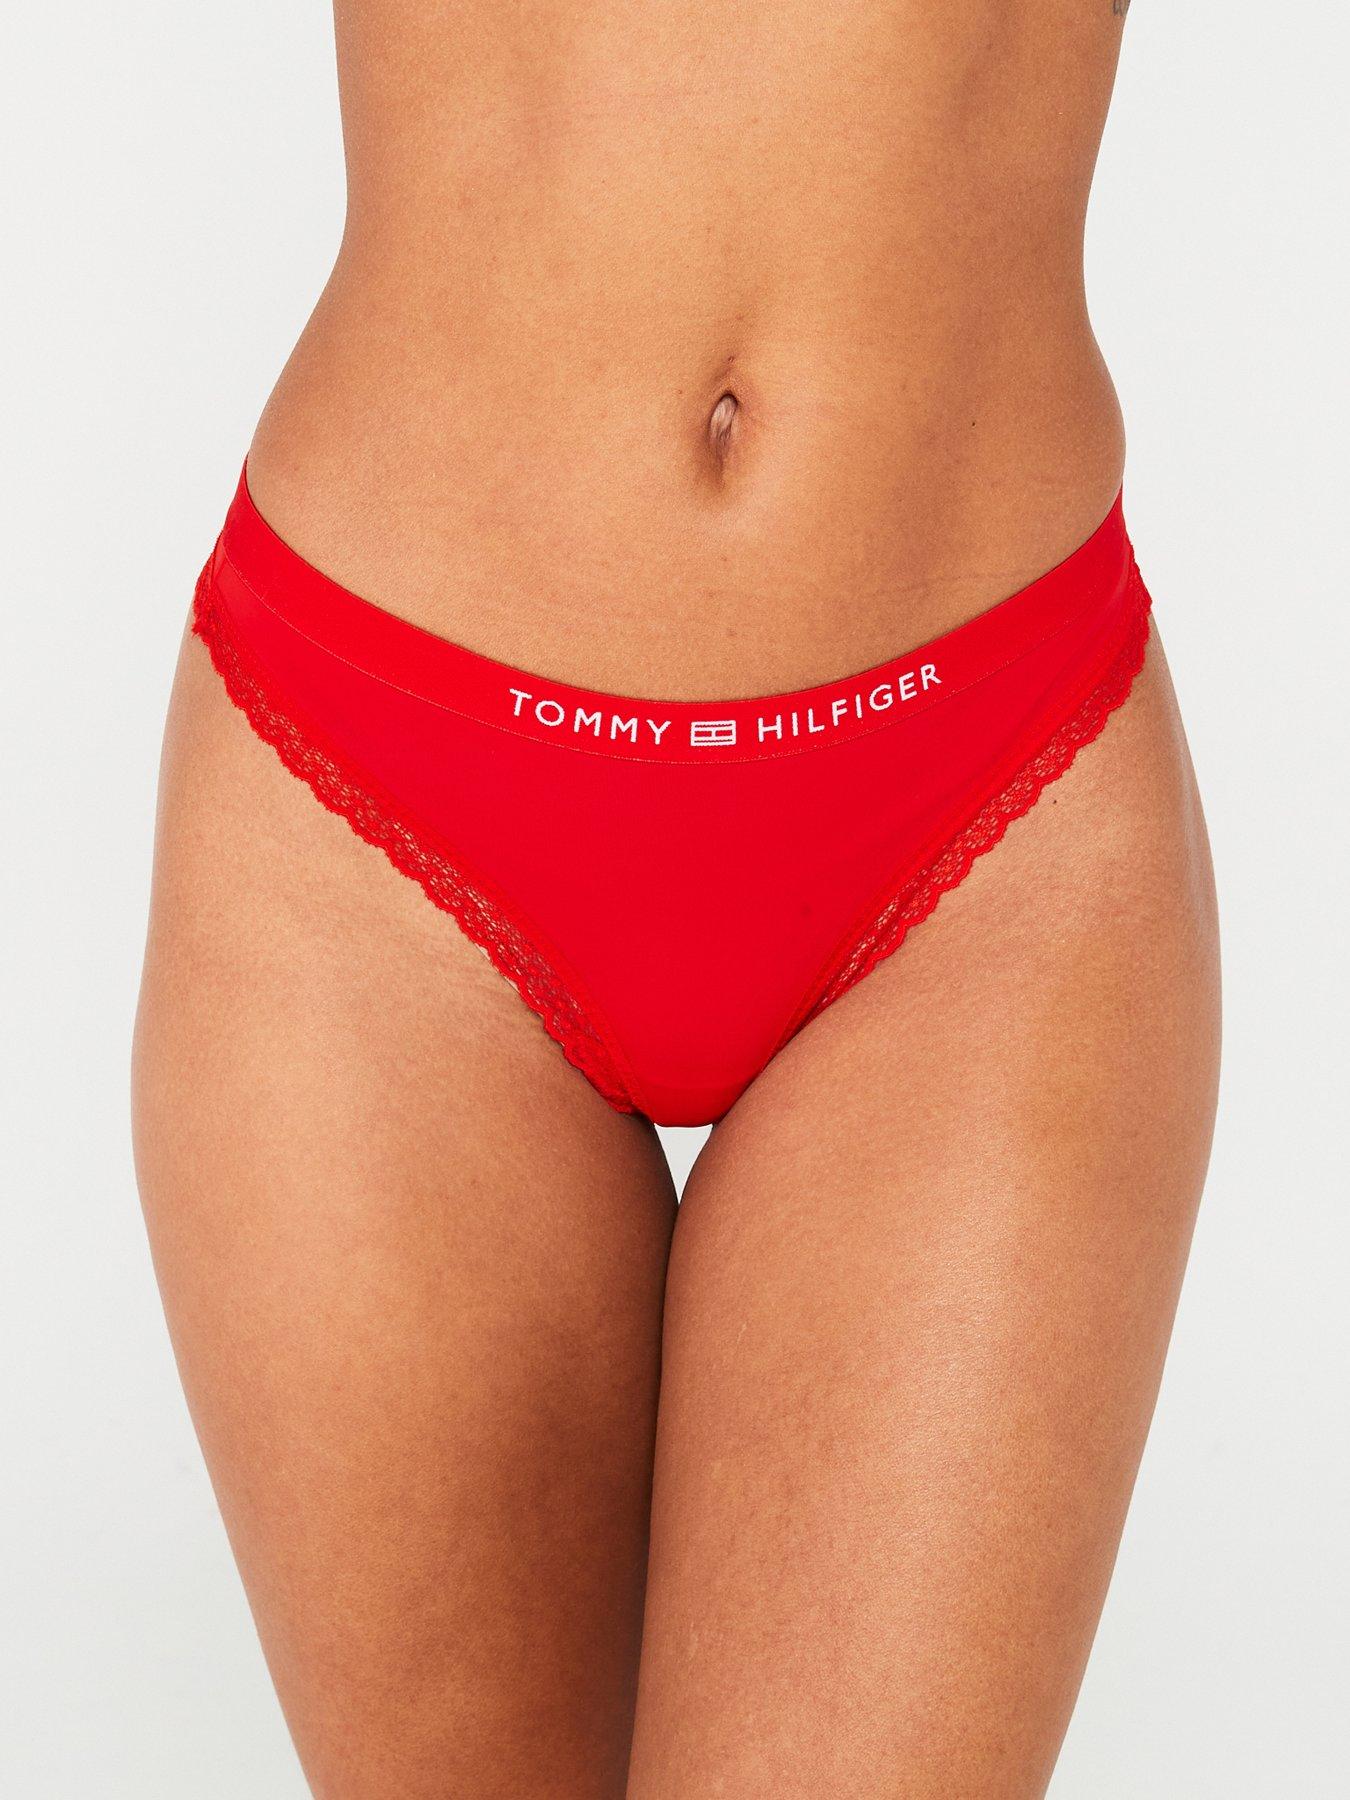 Tommy Hilfiger Lace G-Strings & Thongs for Women